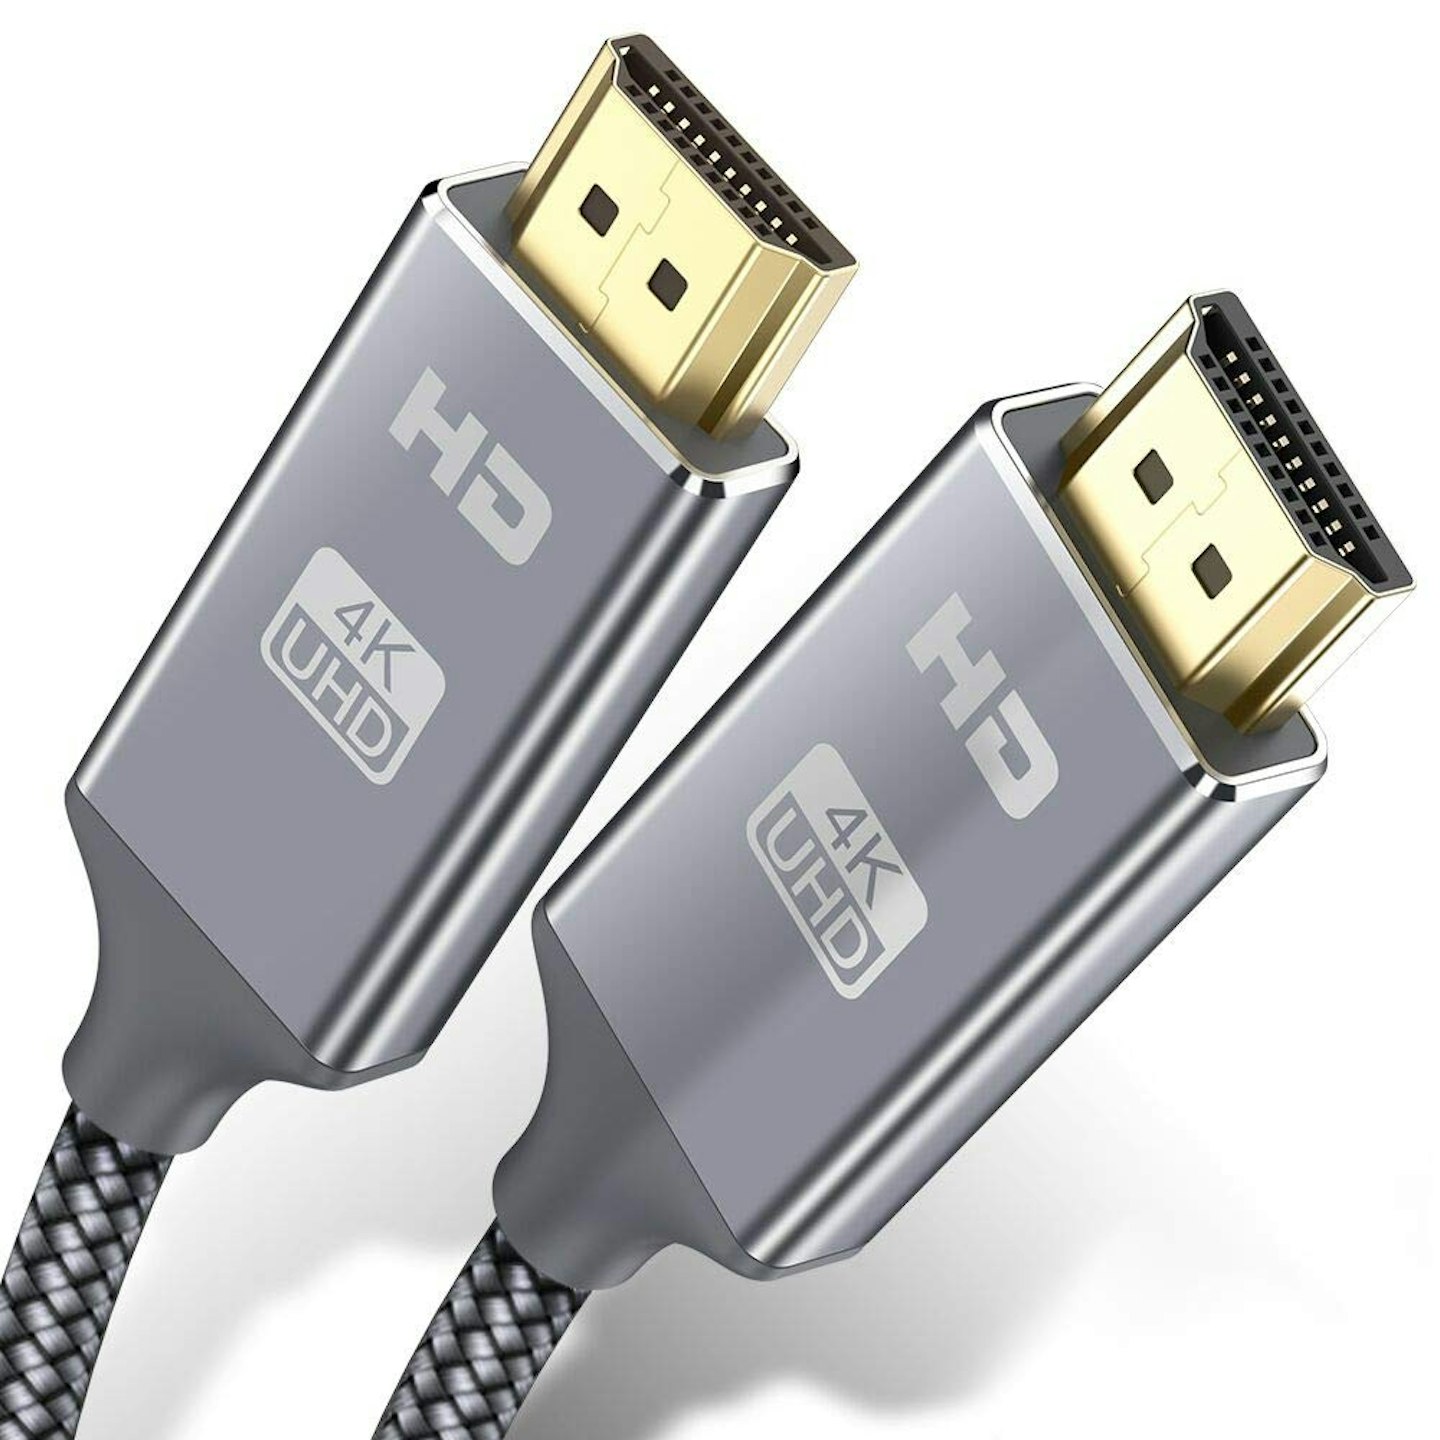 4K HDMI Cable Lead, from £6.99